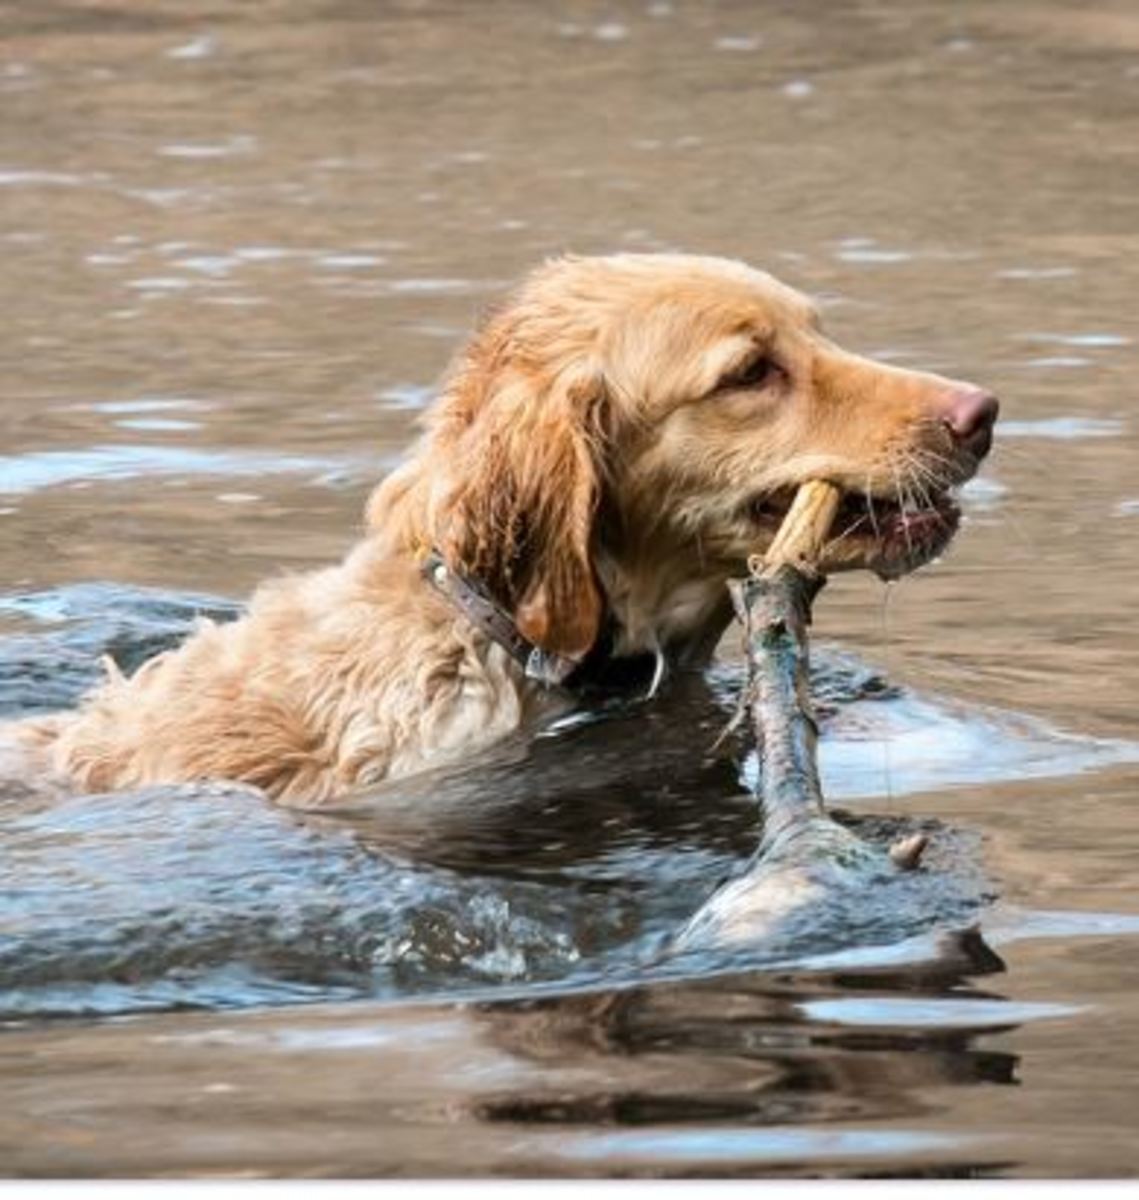  A dog's tail hanging low may be due to limber tail which occurs often after the dog swims in cold water.